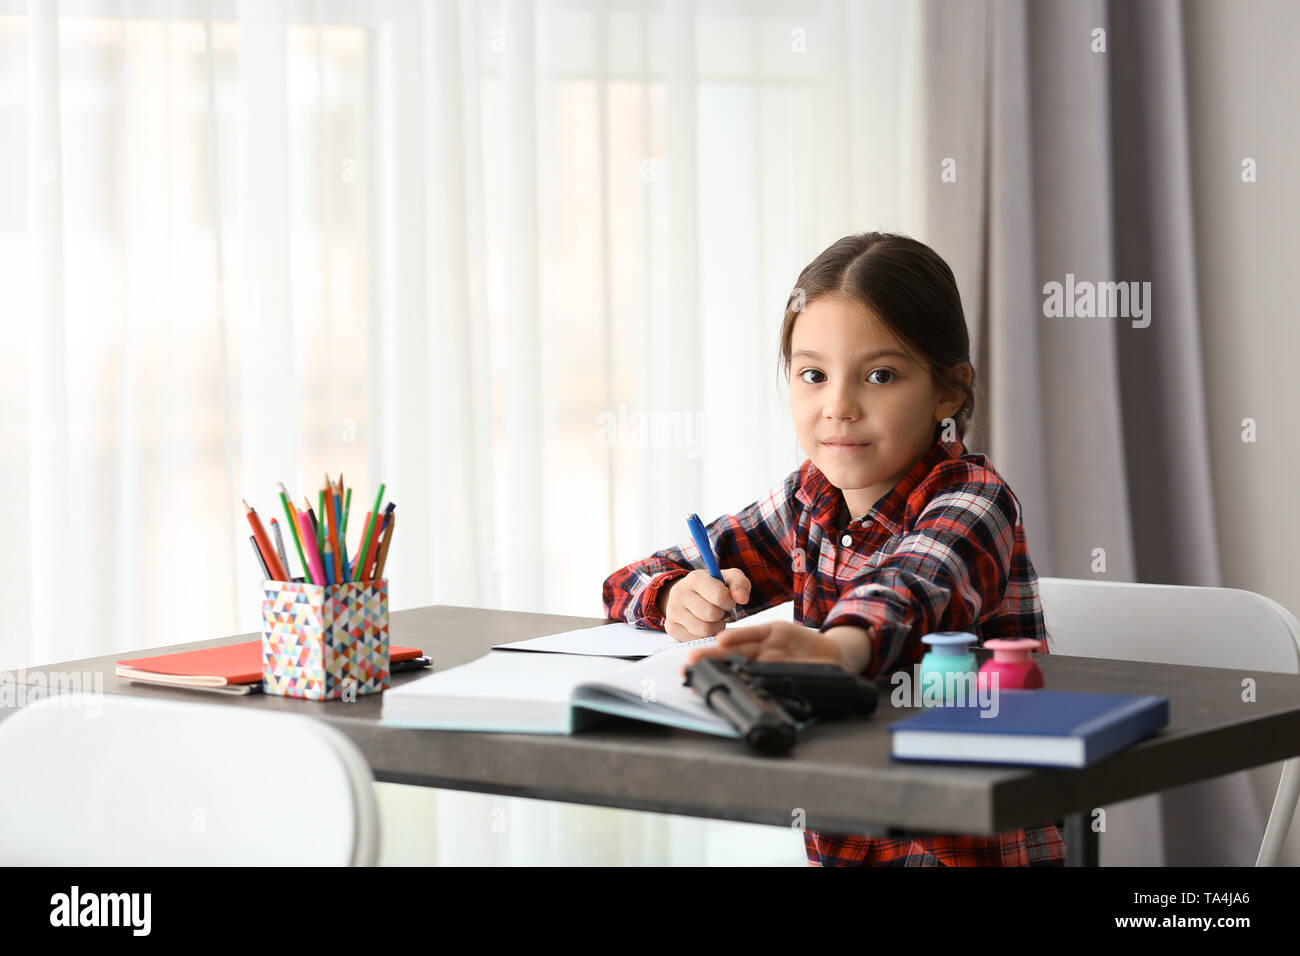 Cute Little Girl With Gun Sitting At Desk In Classroom Concept Of